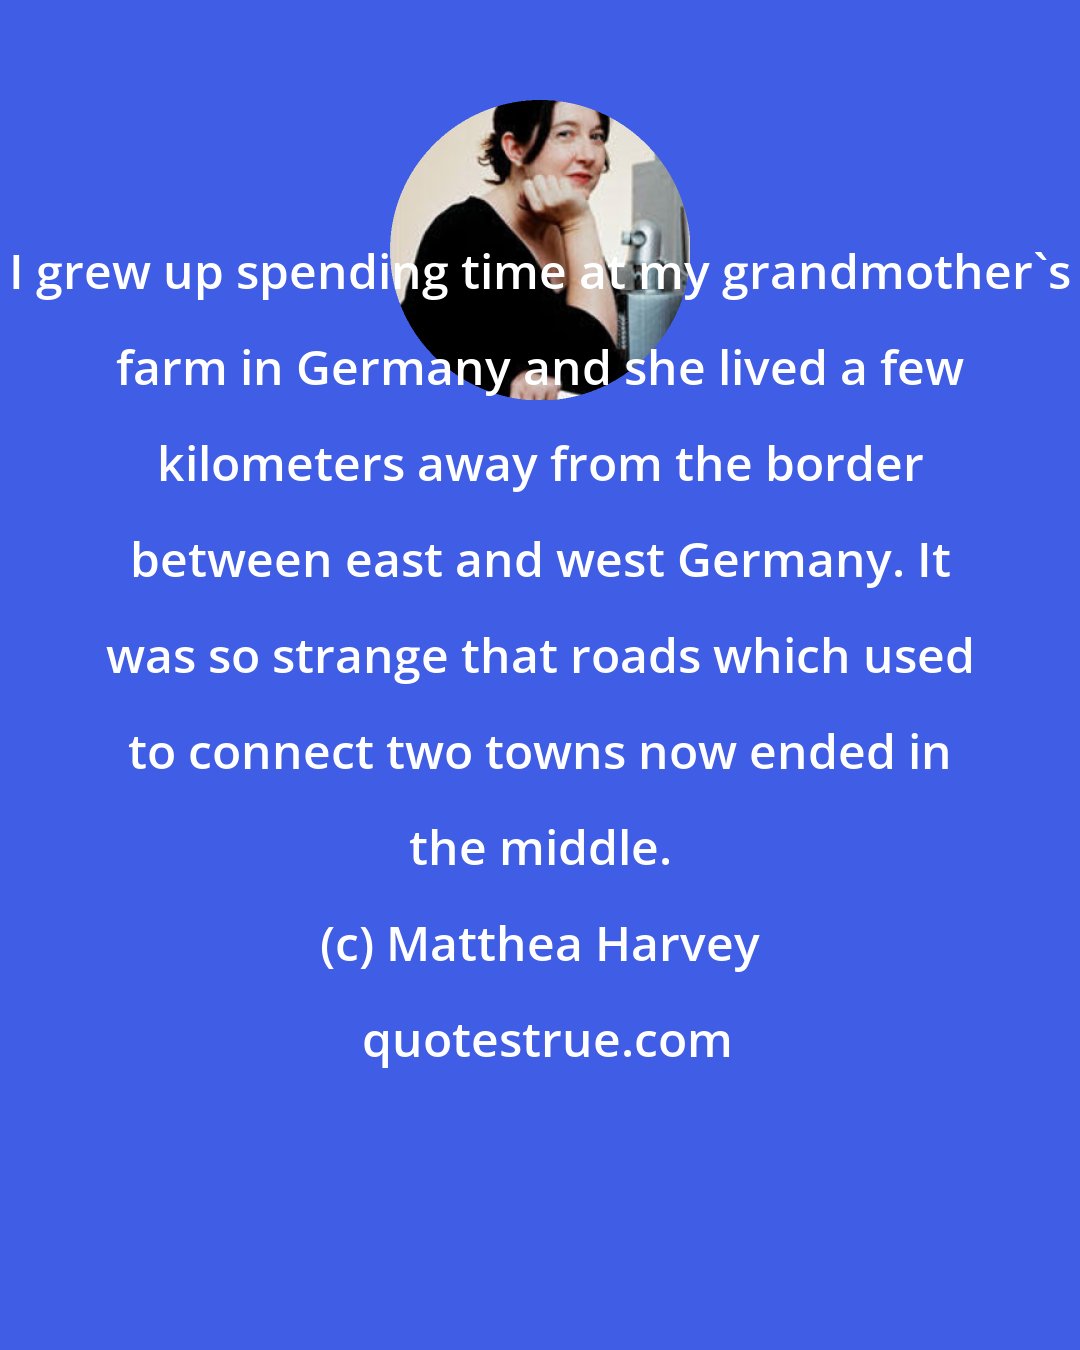 Matthea Harvey: I grew up spending time at my grandmother's farm in Germany and she lived a few kilometers away from the border between east and west Germany. It was so strange that roads which used to connect two towns now ended in the middle.